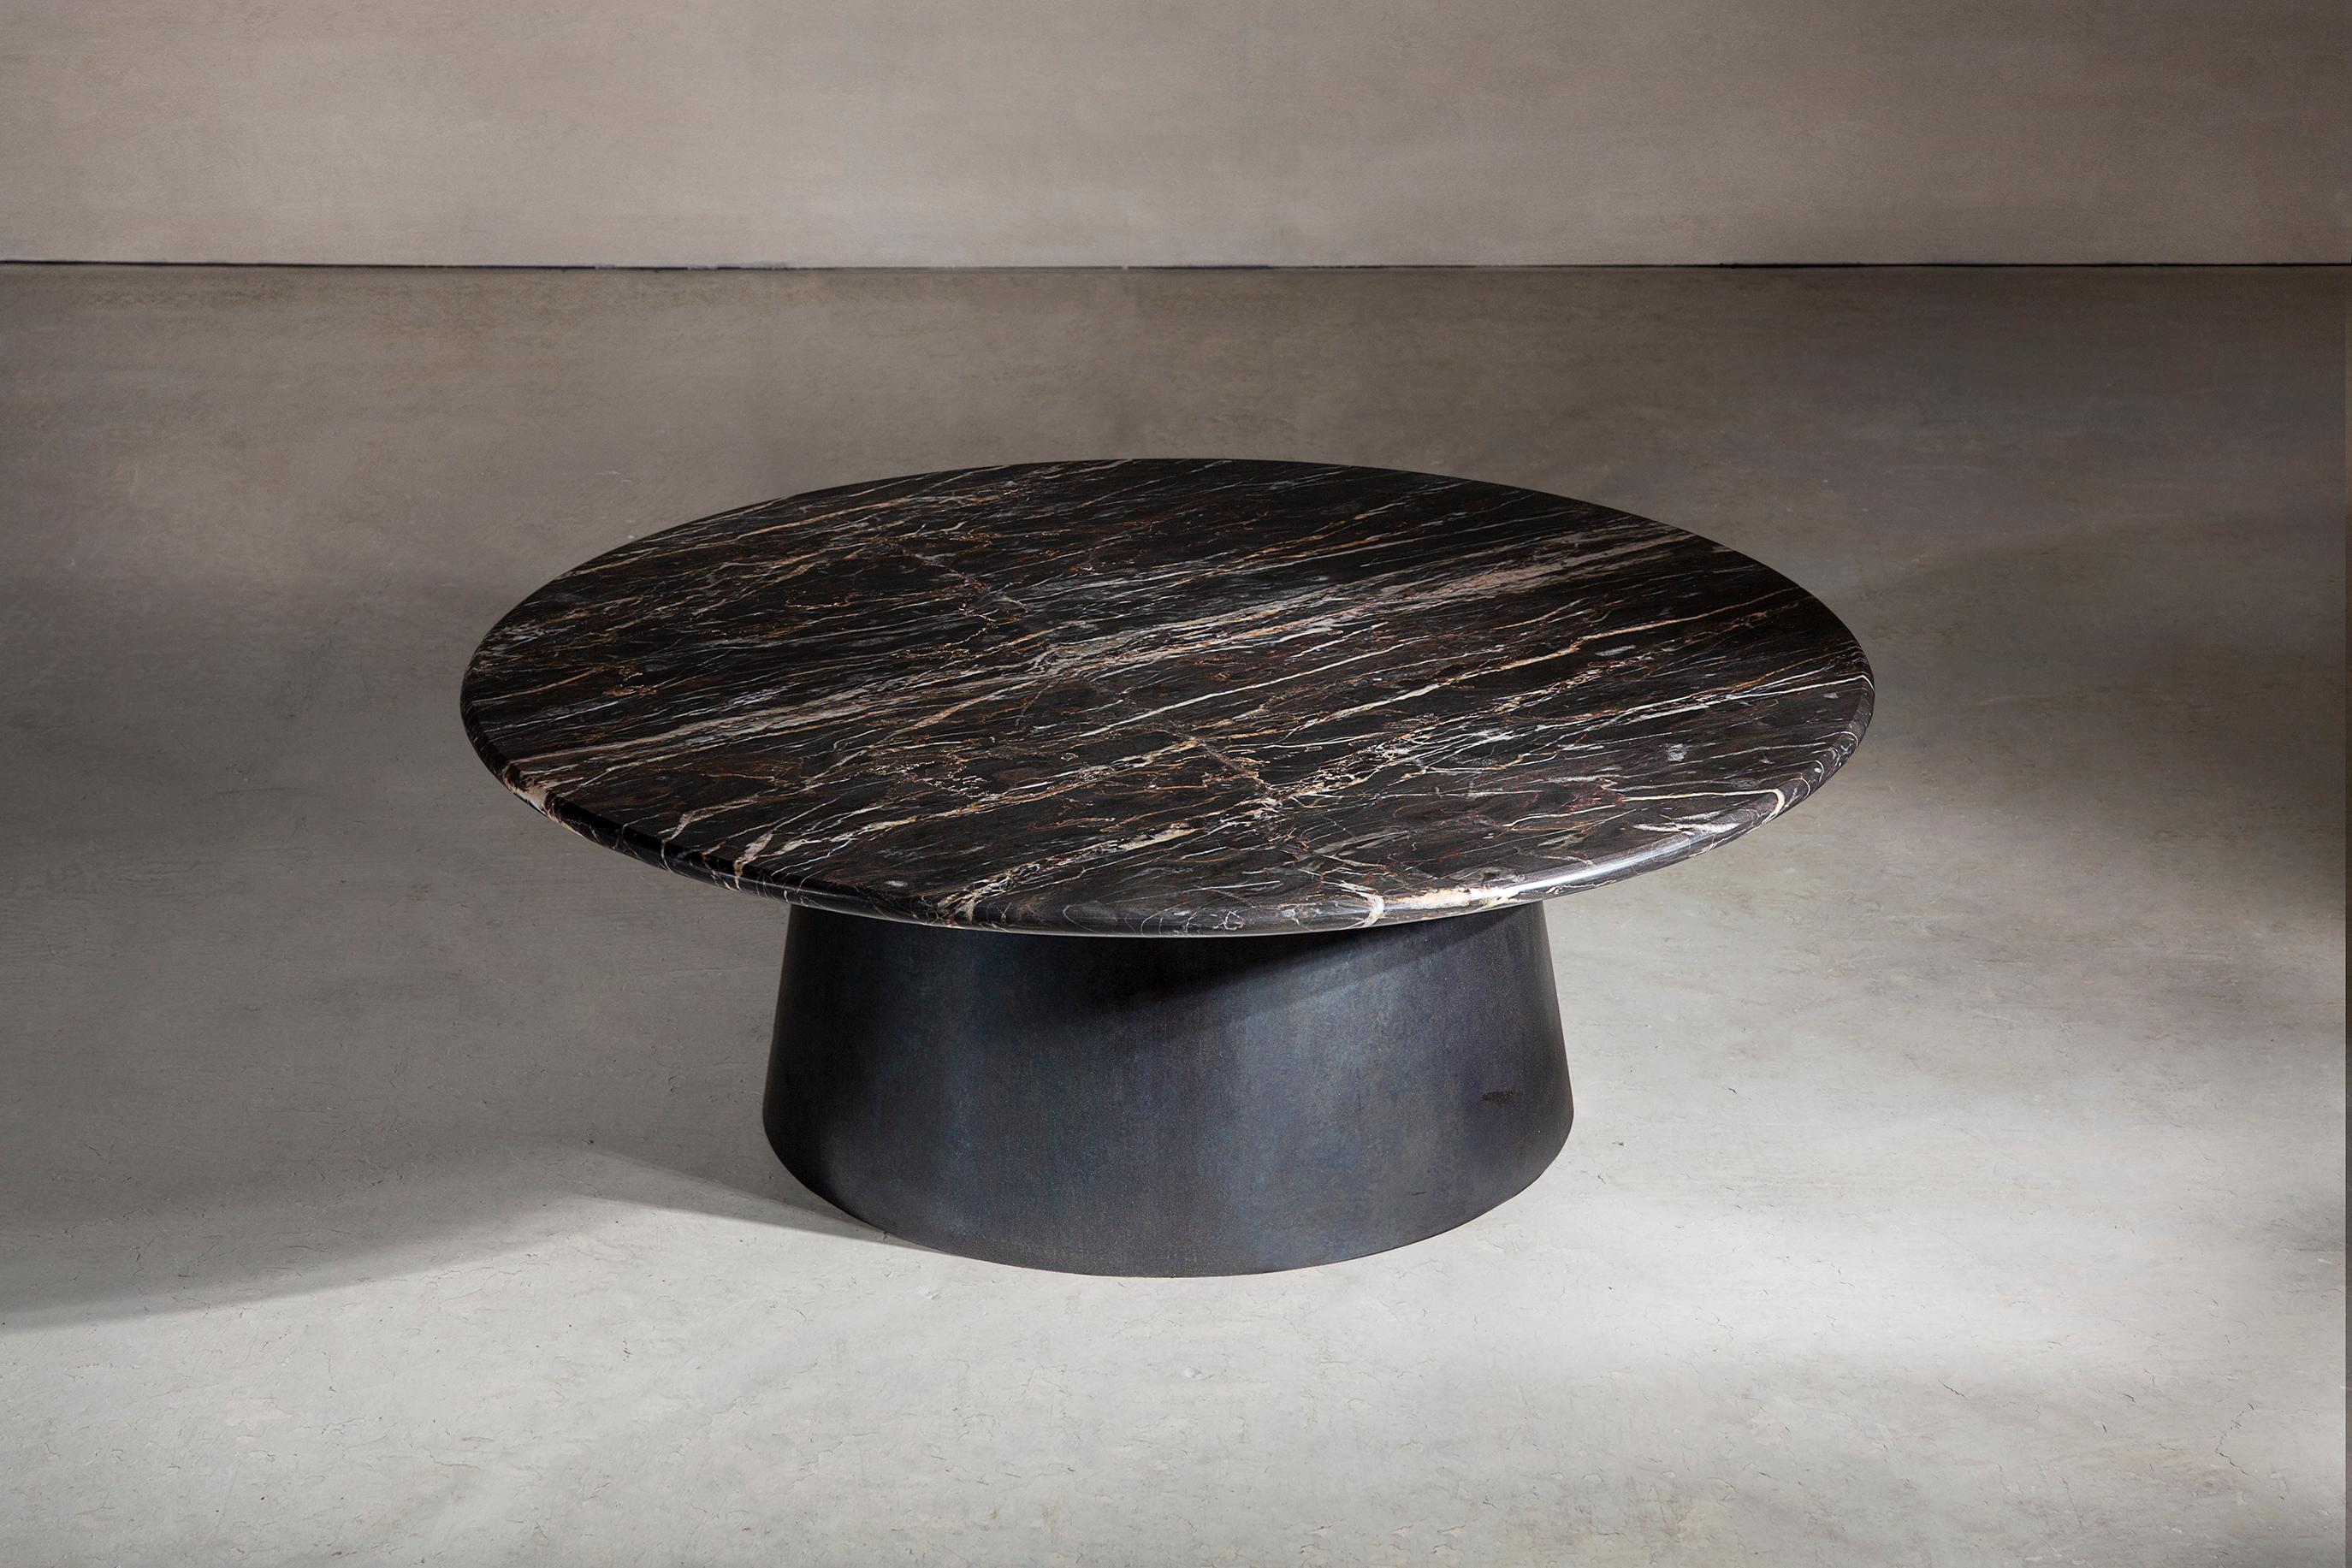 A circular coffee table in incredibly rare British marble and blackened steel. Hand crafted to order in the North. 

Measures: 100cm dia x 35cm height.
Custom finishes and sizes available upon request. 

Made to order in 12 weeks.
Price excludes VAT.